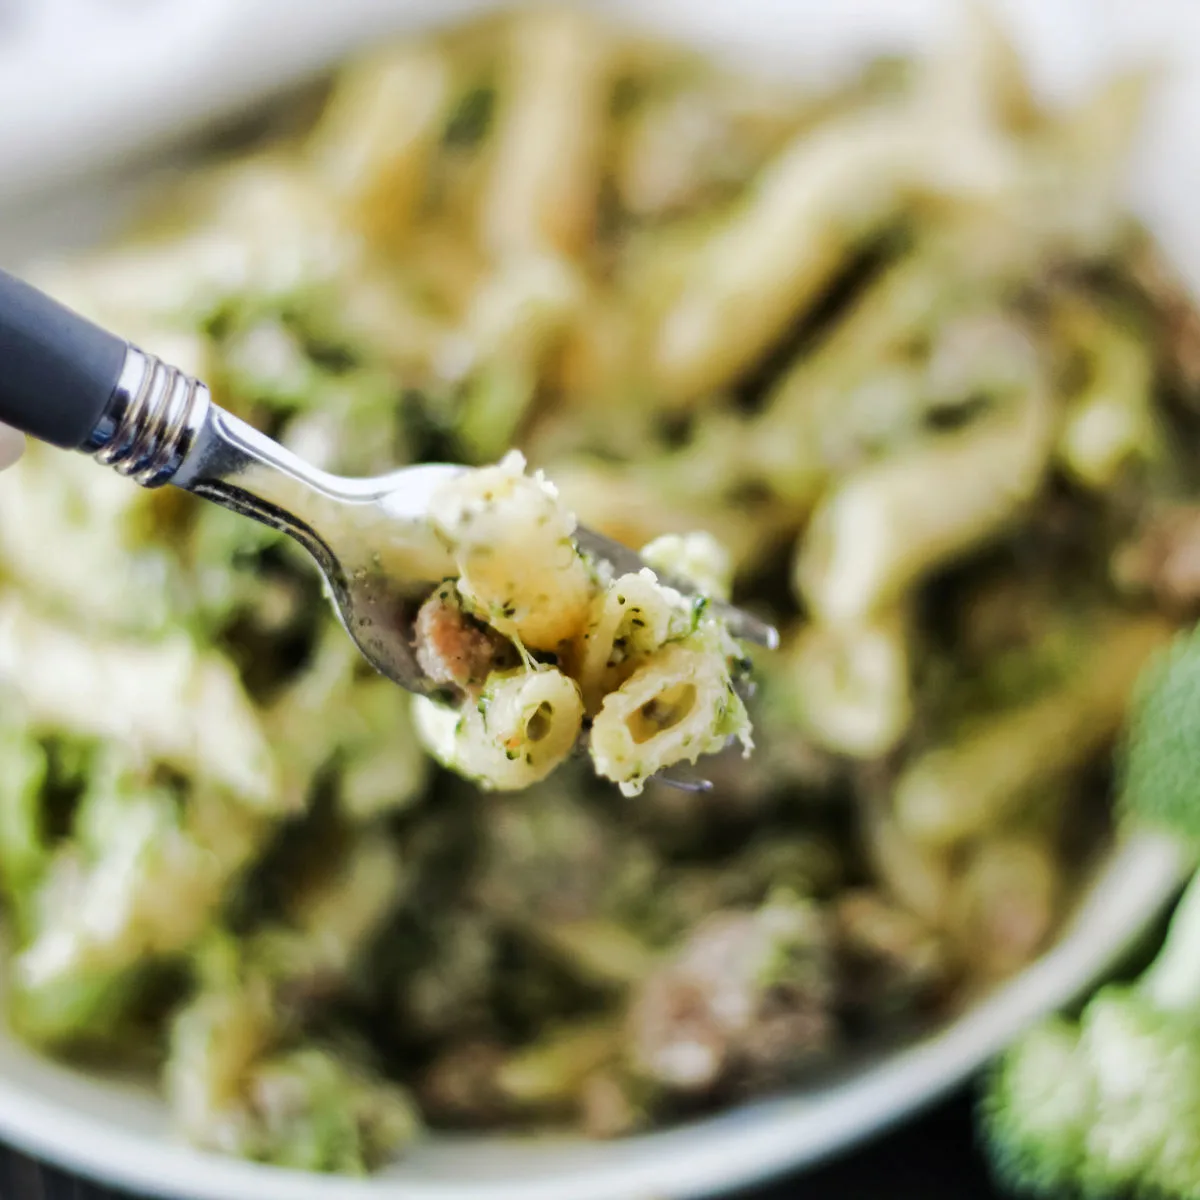 forkful of penne pasta with broccoli and Italian sausage